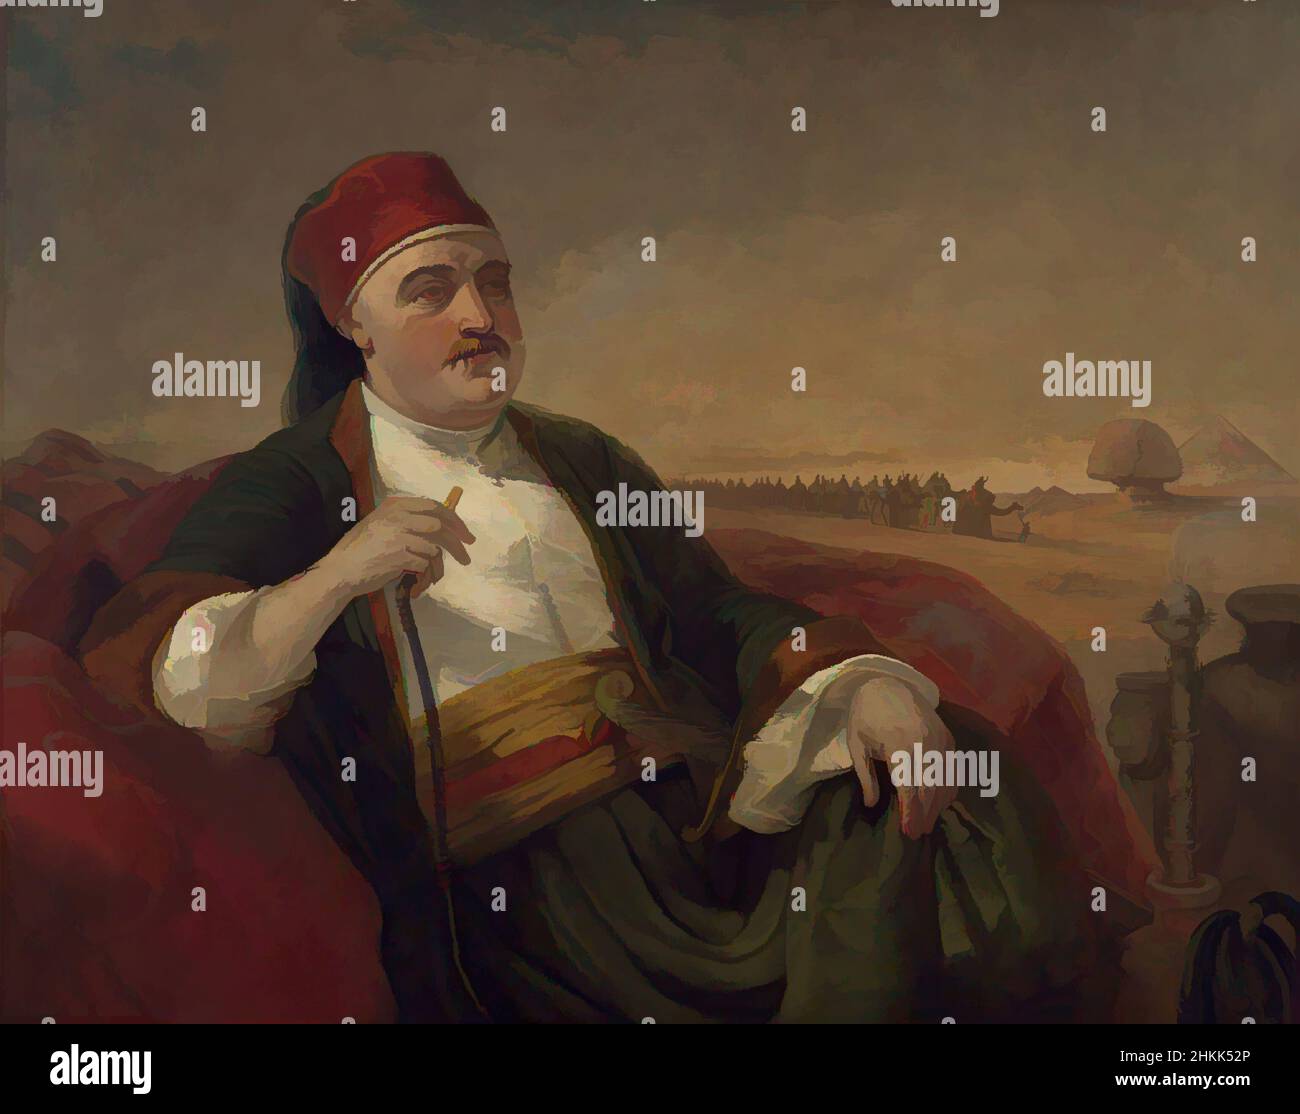 Art inspired by Portrait of Henry Abbott, Thomas Hicks, American, 1823-1890, Oil on canvas, ca. 1861, 39 3/4 x 50 1/4 in., 101 x 127.6 cm, fez, man smoking, Mason, Masonic costume, Orientalism, reclining figure, Classic works modernized by Artotop with a splash of modernity. Shapes, color and value, eye-catching visual impact on art. Emotions through freedom of artworks in a contemporary way. A timeless message pursuing a wildly creative new direction. Artists turning to the digital medium and creating the Artotop NFT Stock Photo